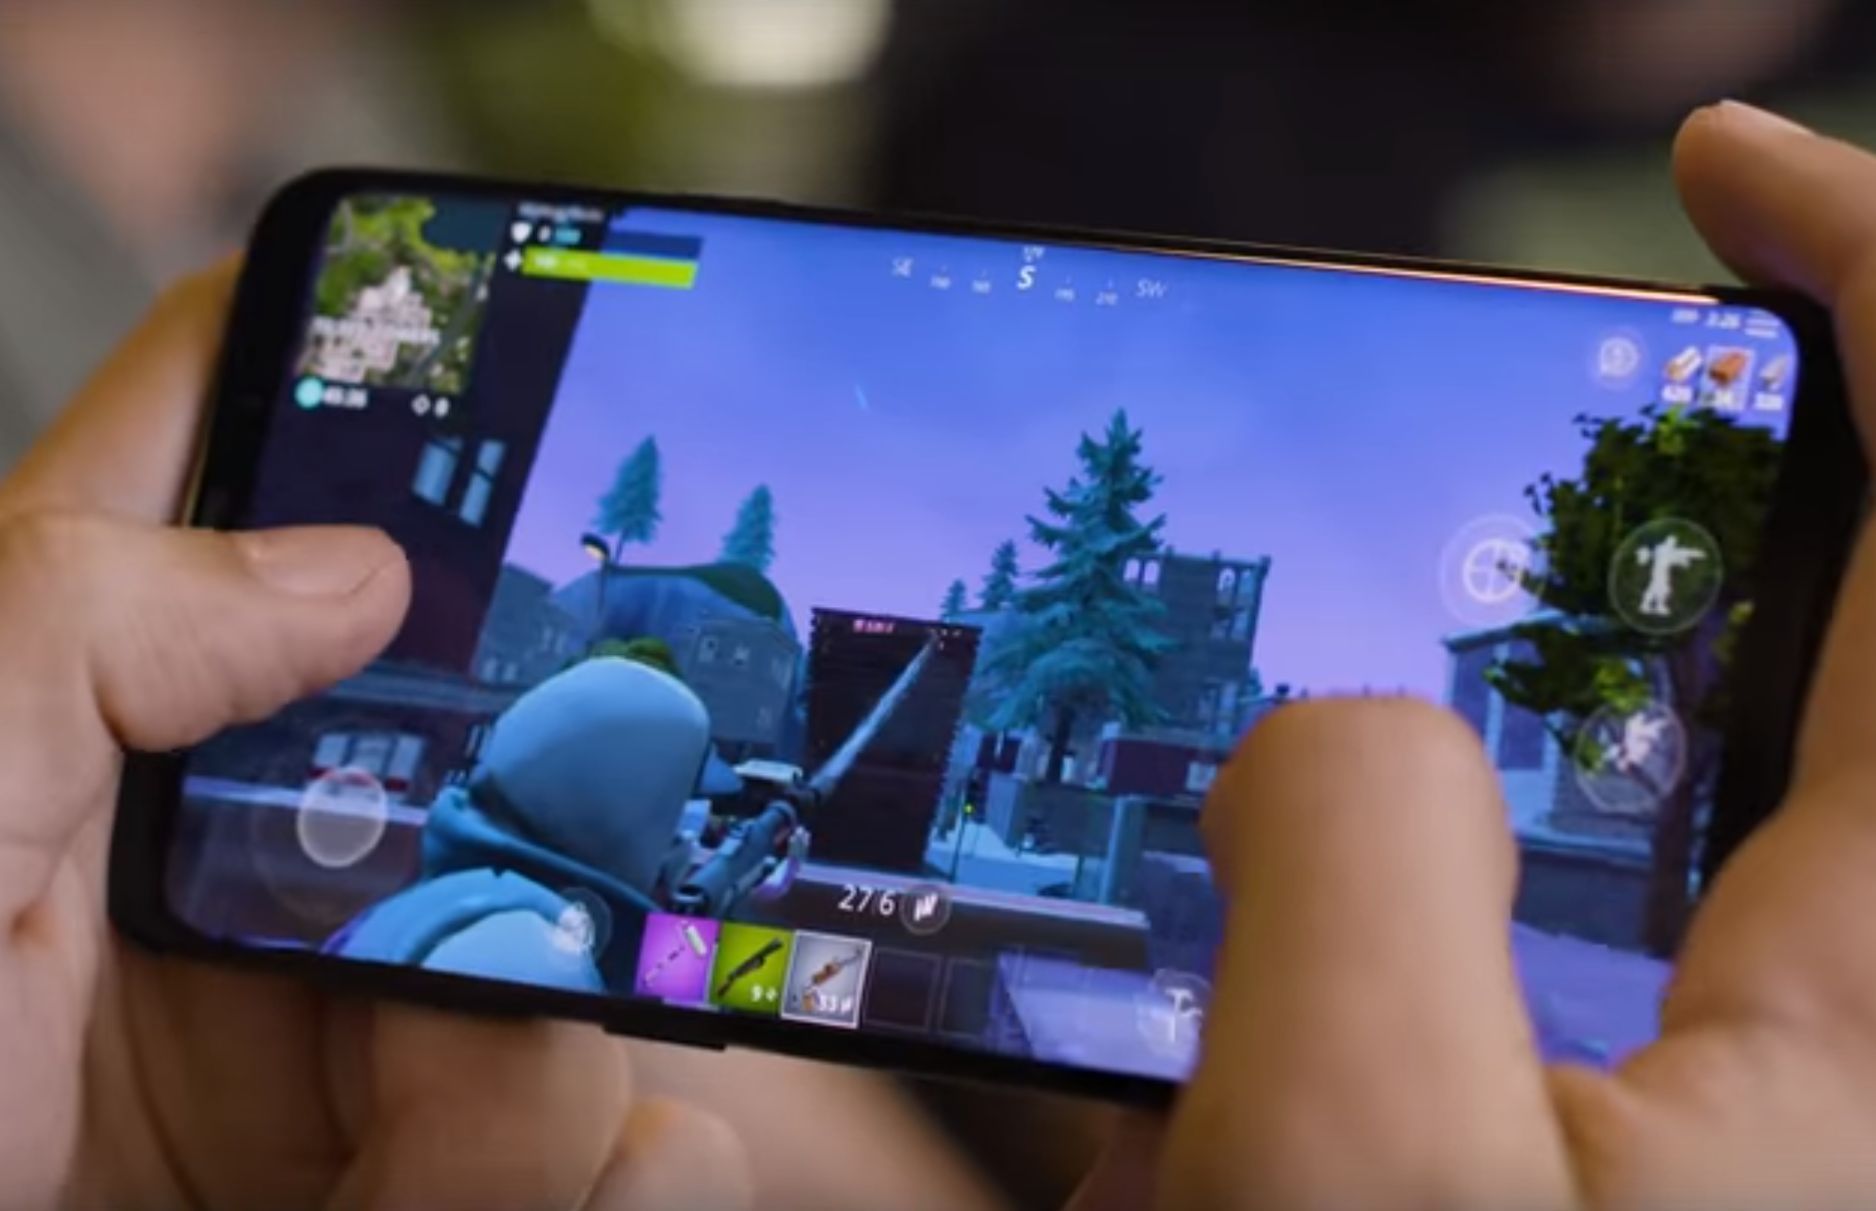 Fortnite Is Now Available On All Compatible Android Devices - 1876 x 1211 jpeg 128kB